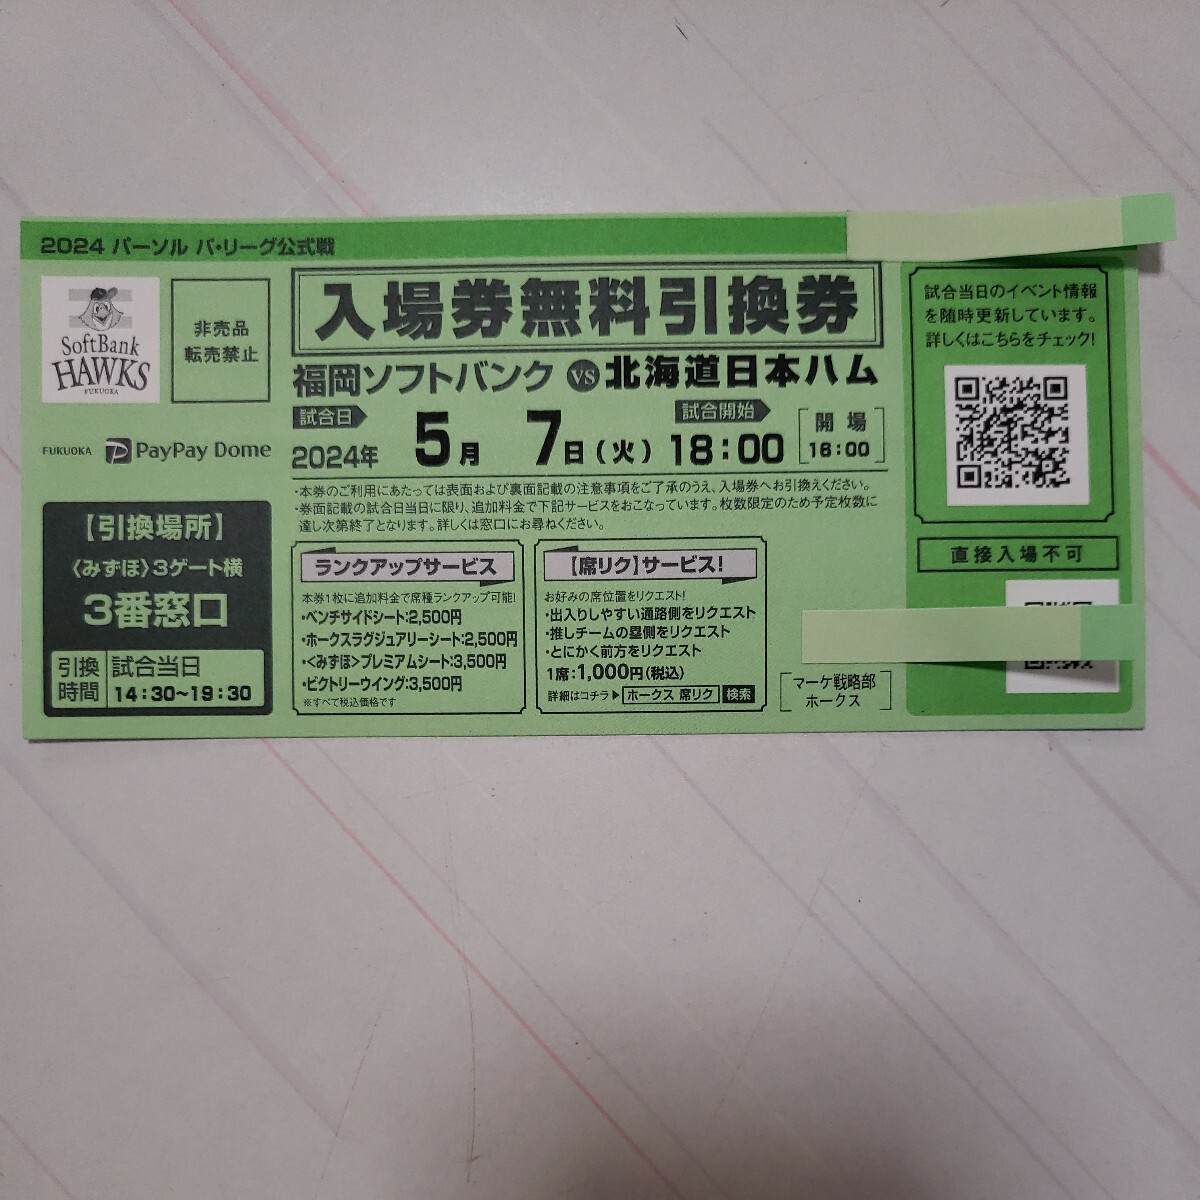 5 month 7 day ( fire ) PayPay dome SoftBank vs Japan ham admission ticket free coupon 